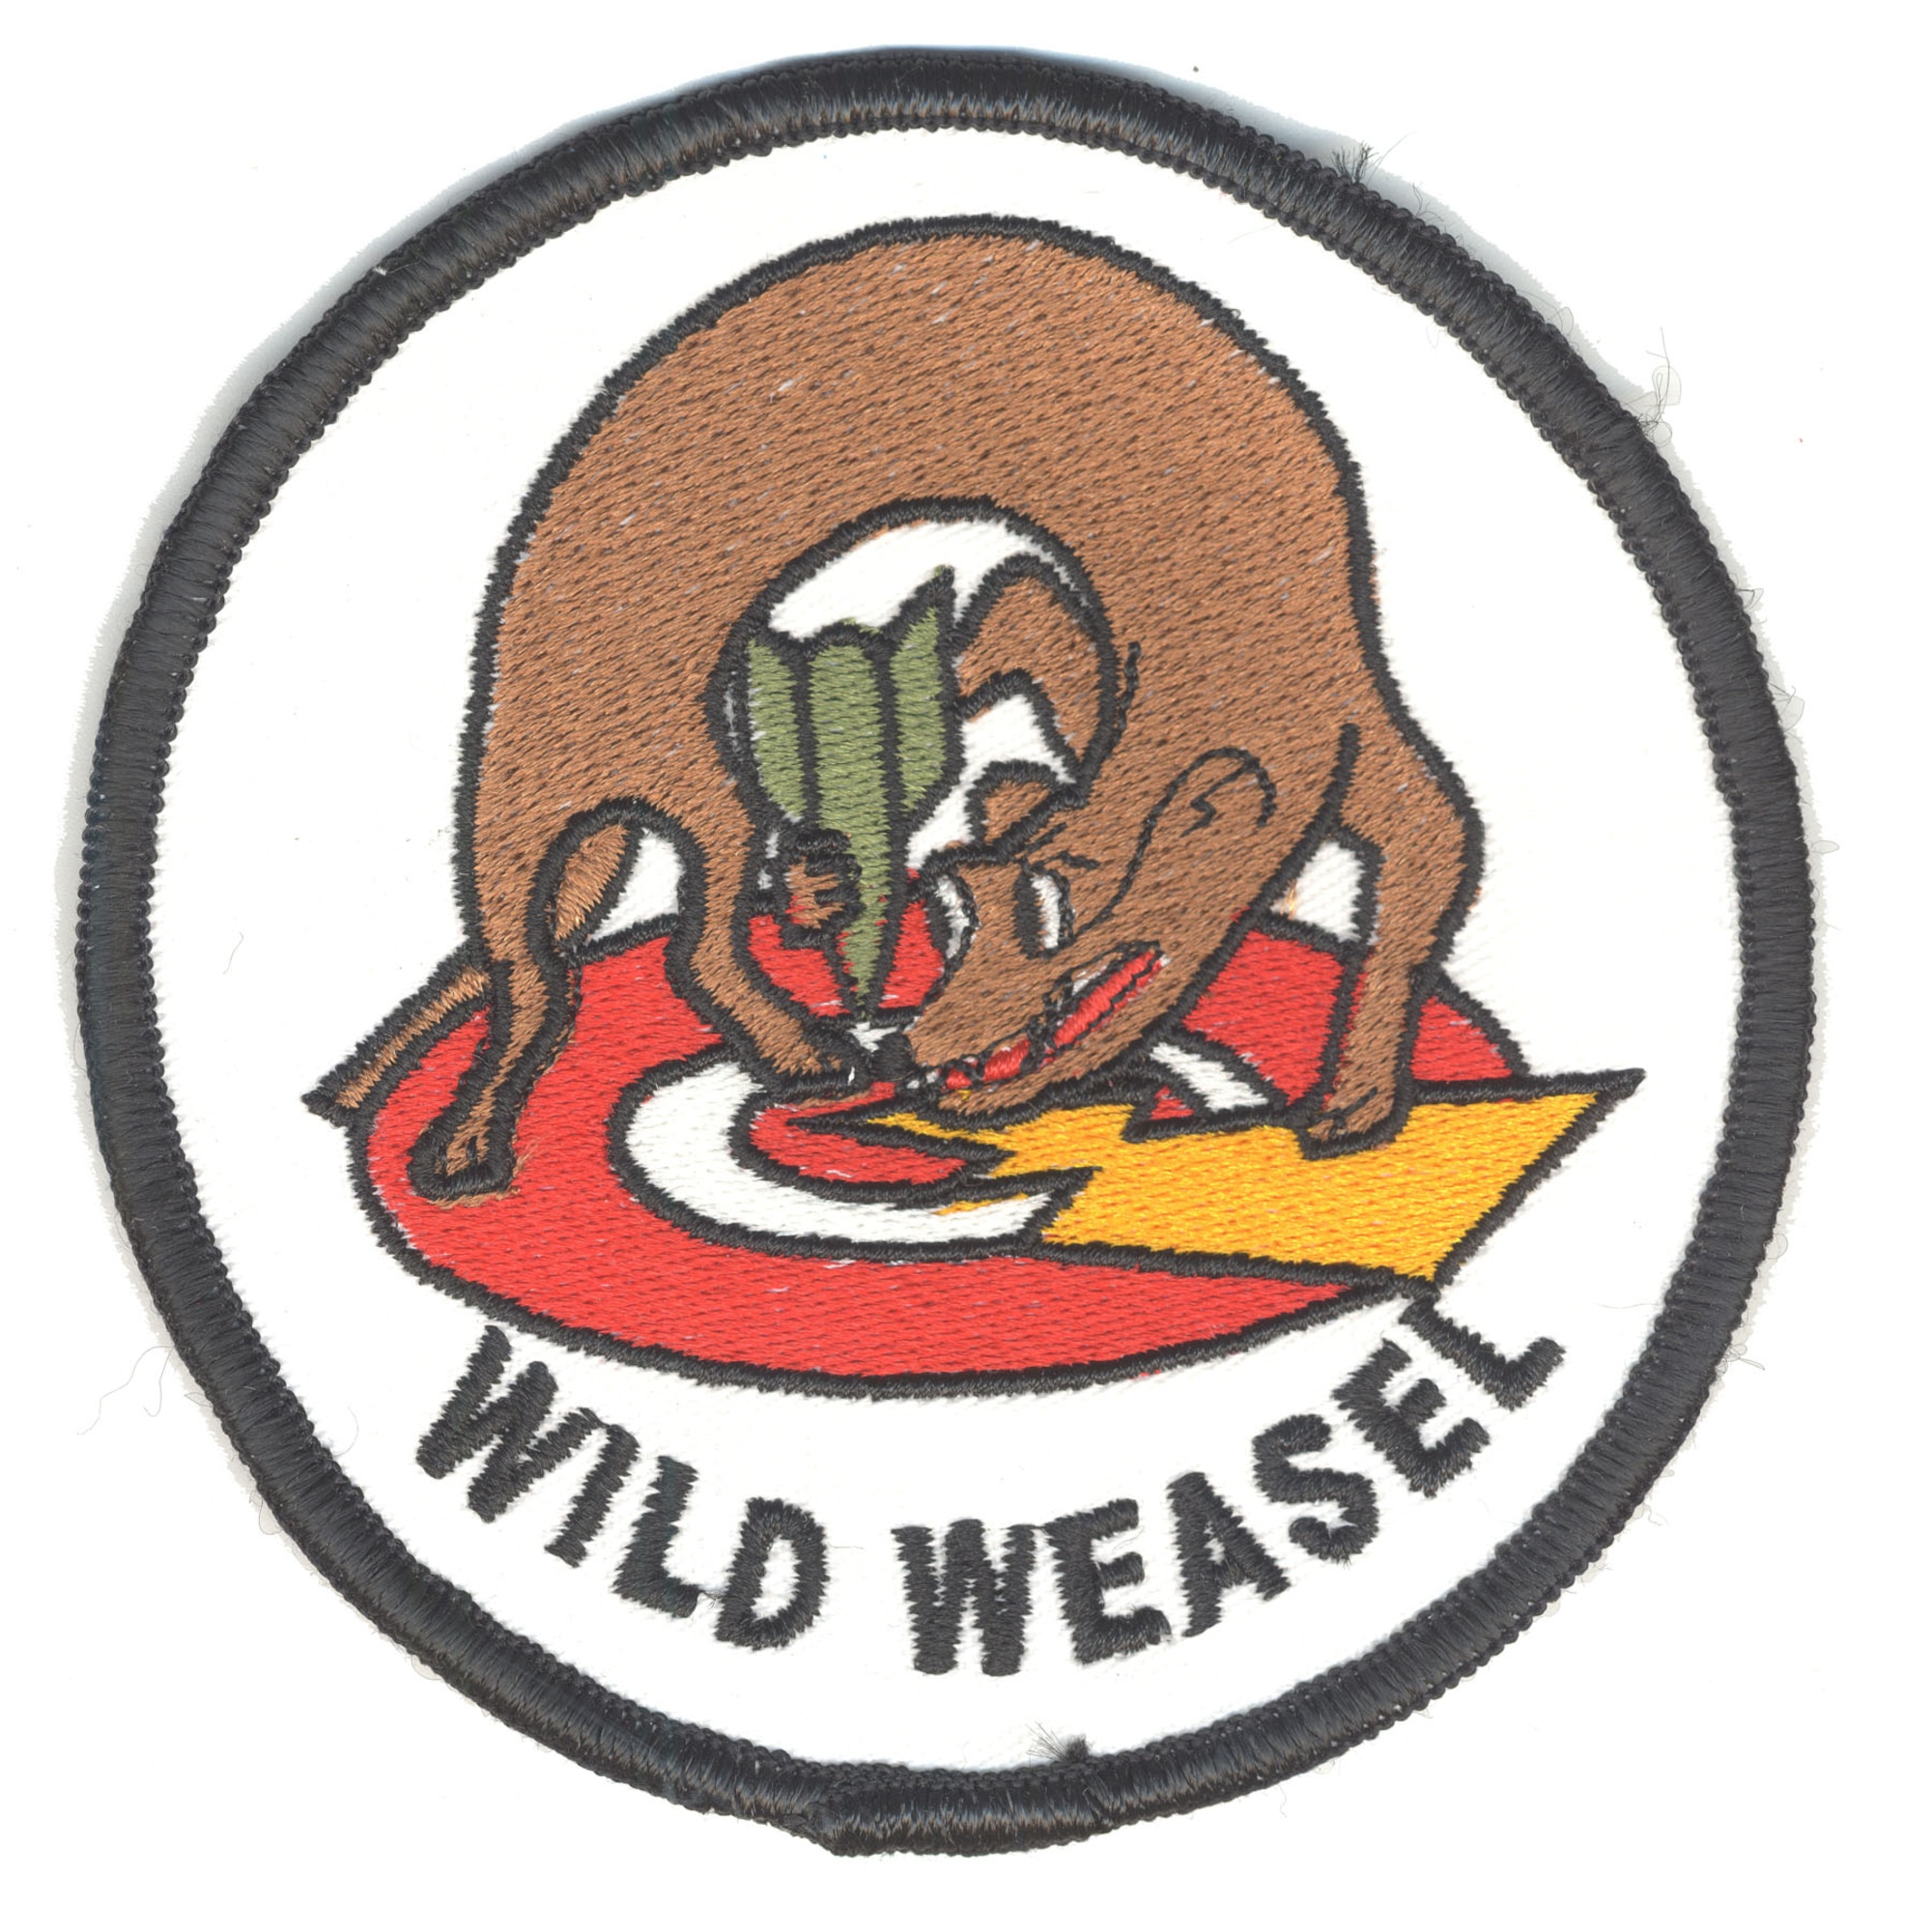 A weasel, nicknamed Willie, figures prominently in many official and unofficial Wild Weasel patches and logos. (U.S. Air Force)